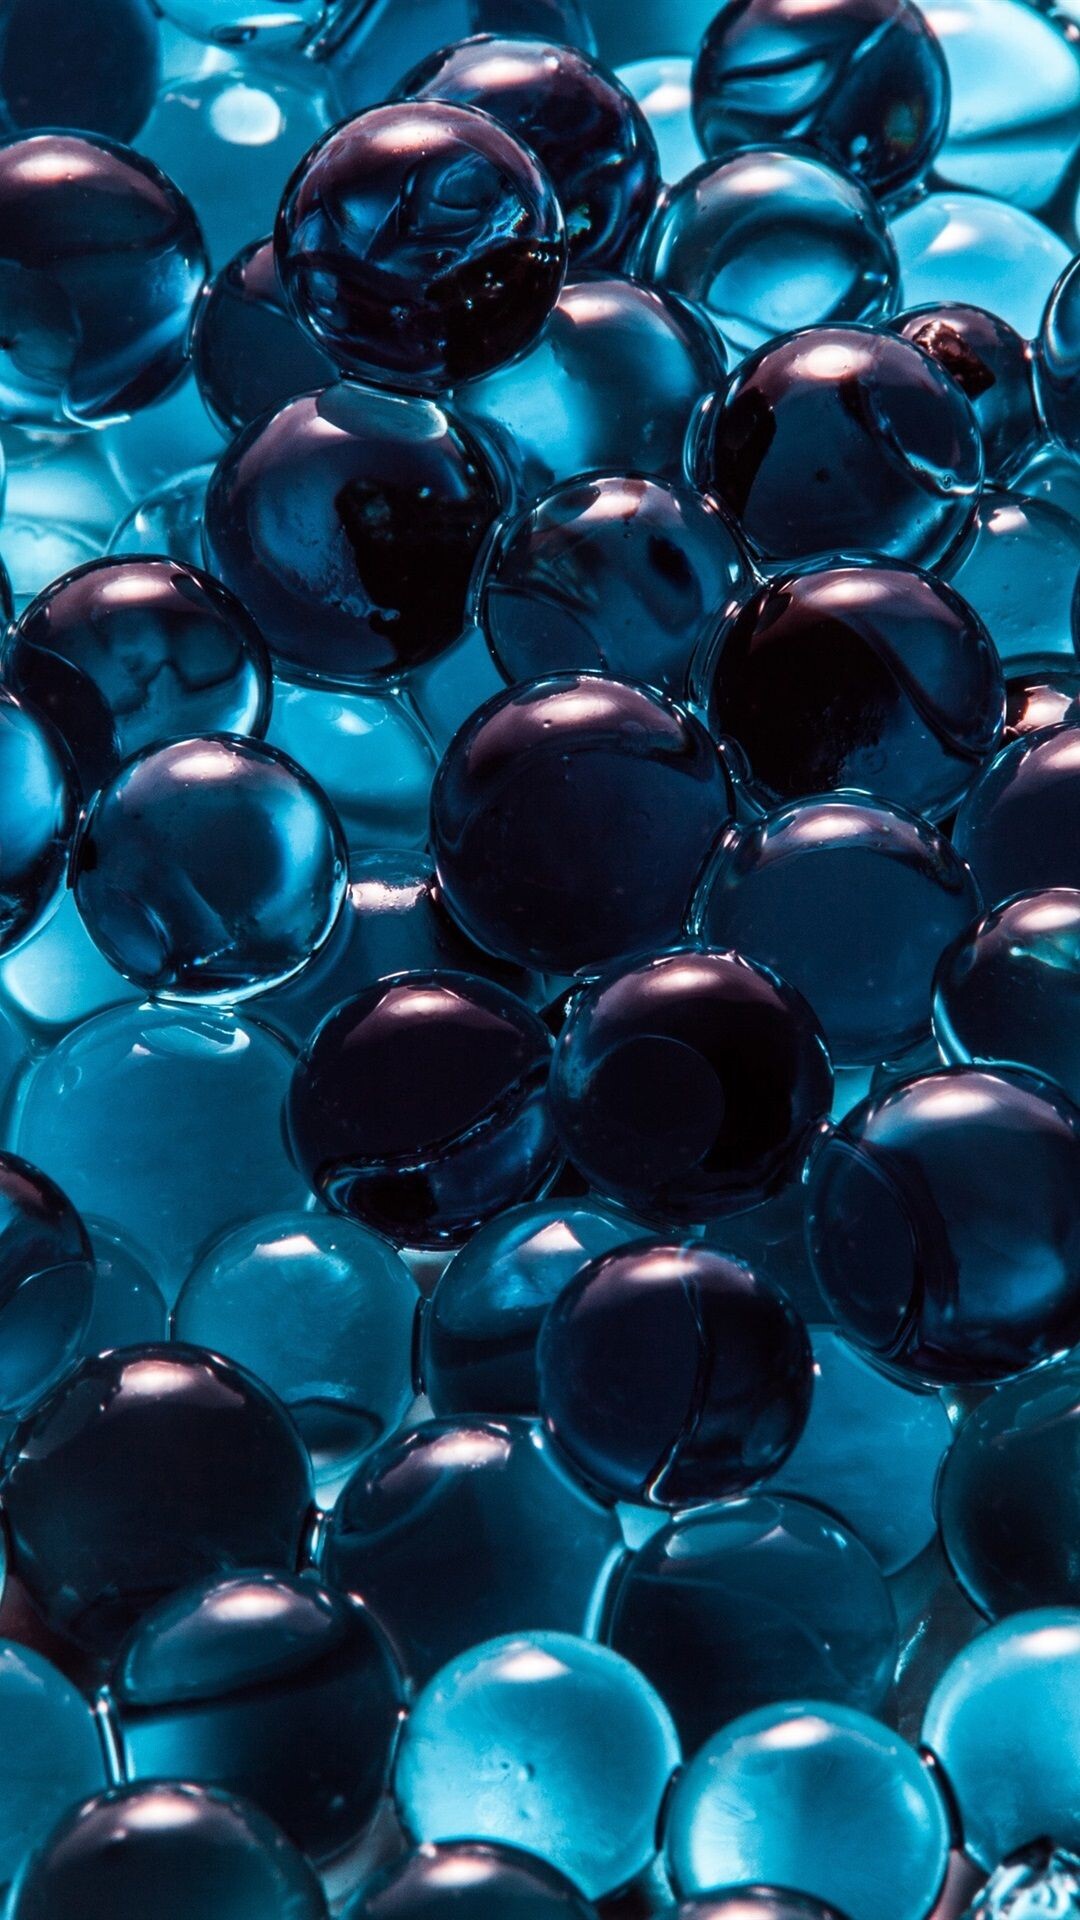 Glass: A brittle noncrystalline transparent substance produced by fusion, Spheres. 1080x1920 Full HD Wallpaper.